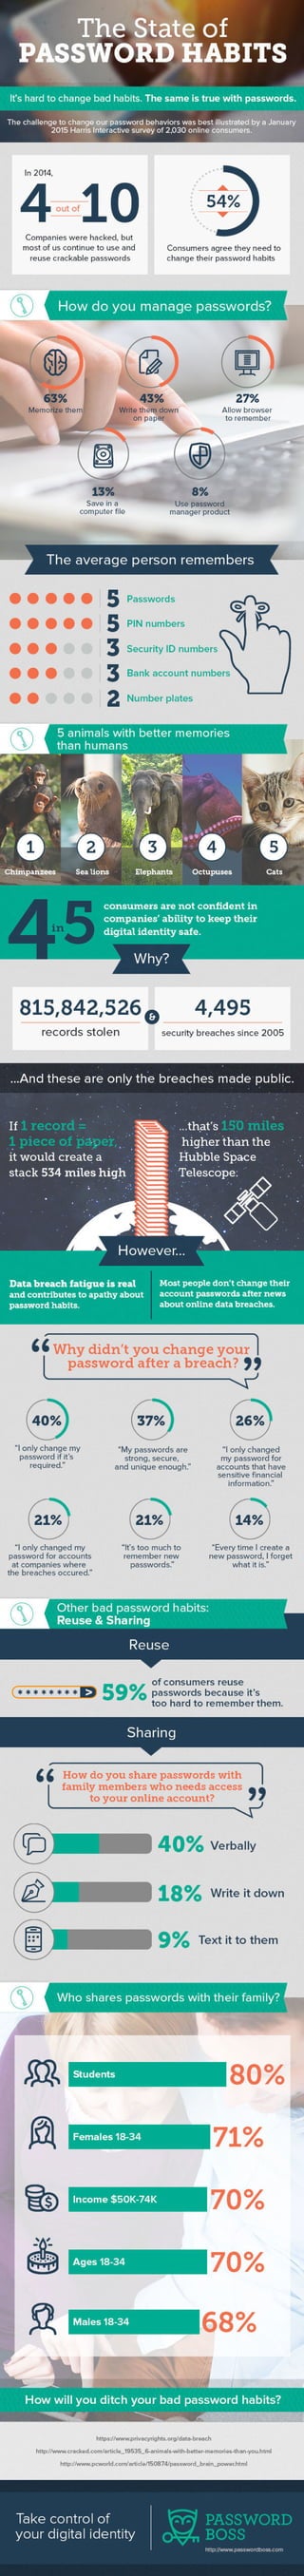 The State of Passowrd Habits | Infographic